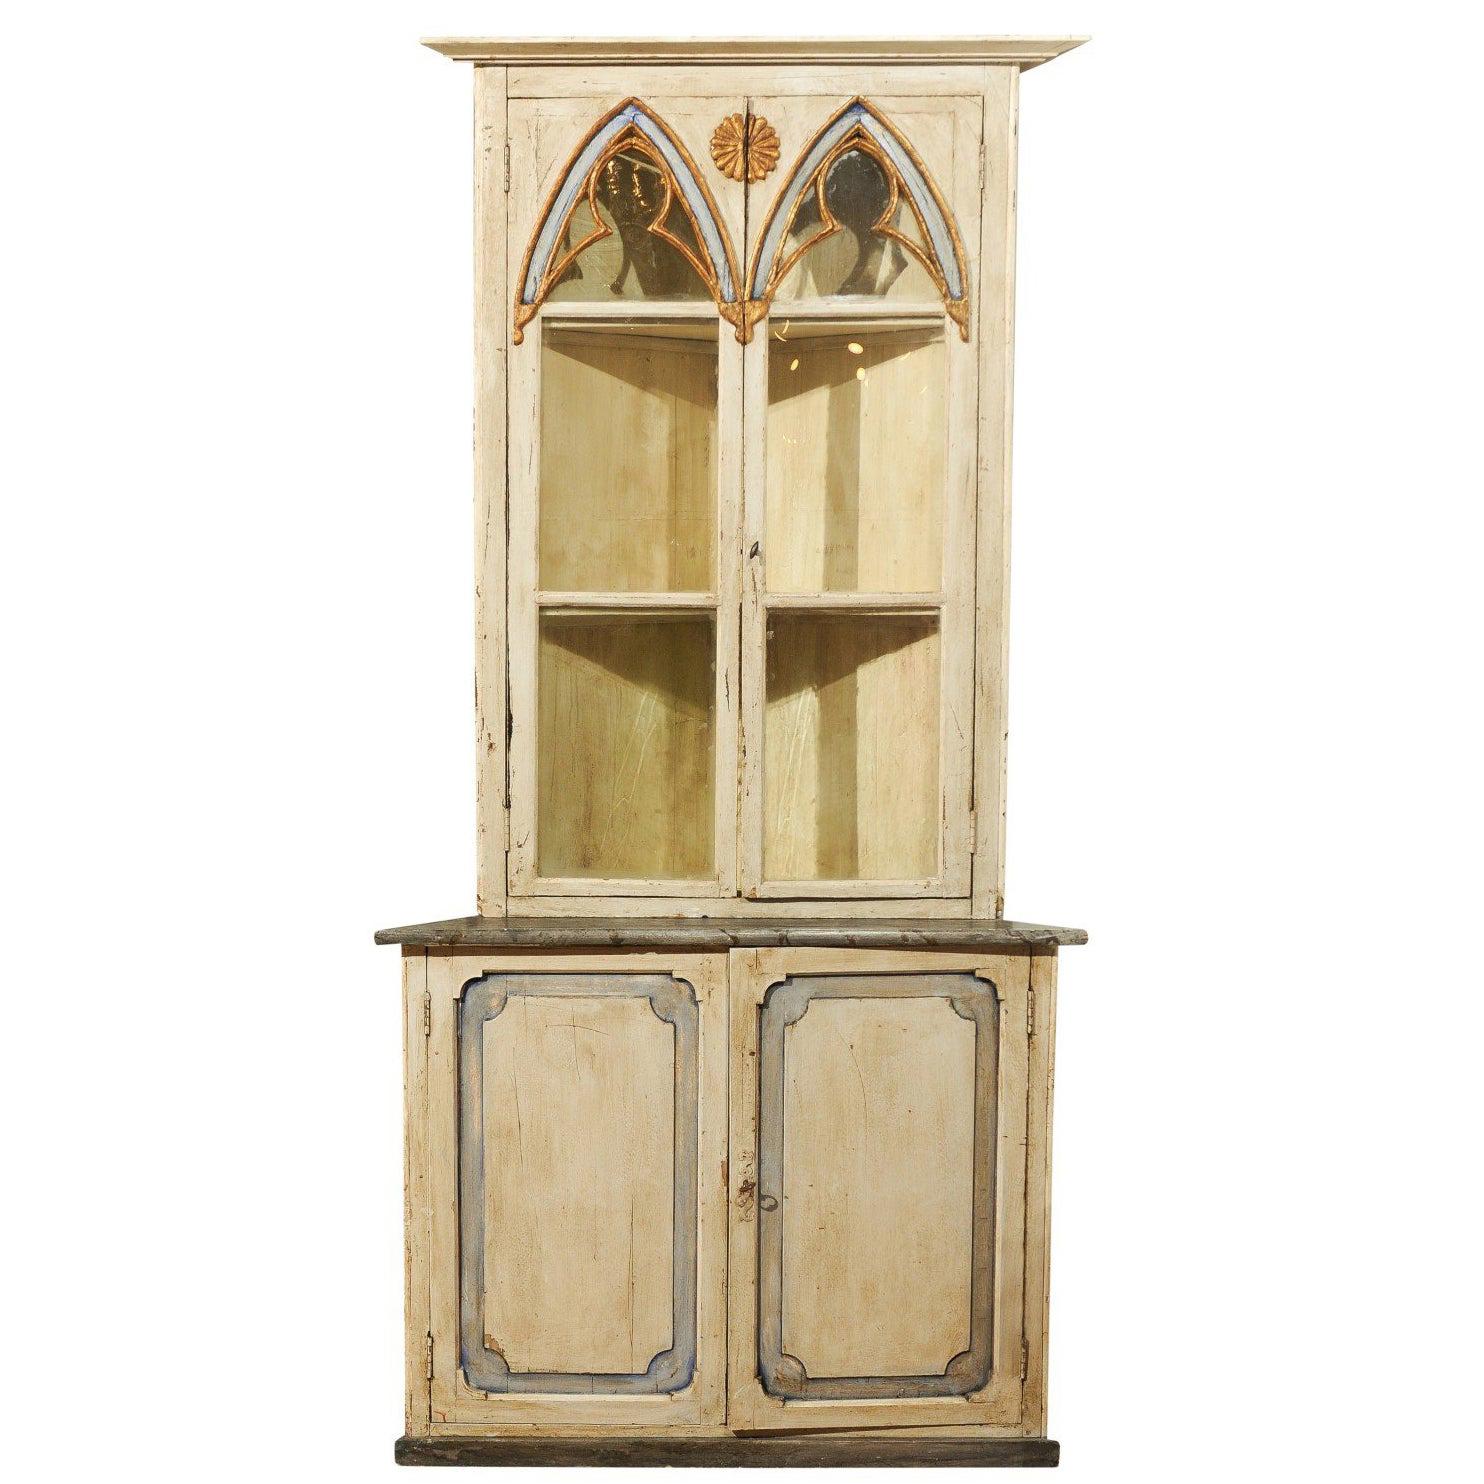 Swedish Gothic Revival Painted Wood Corner Cabinet with Glass Doors, circa 1830 For Sale